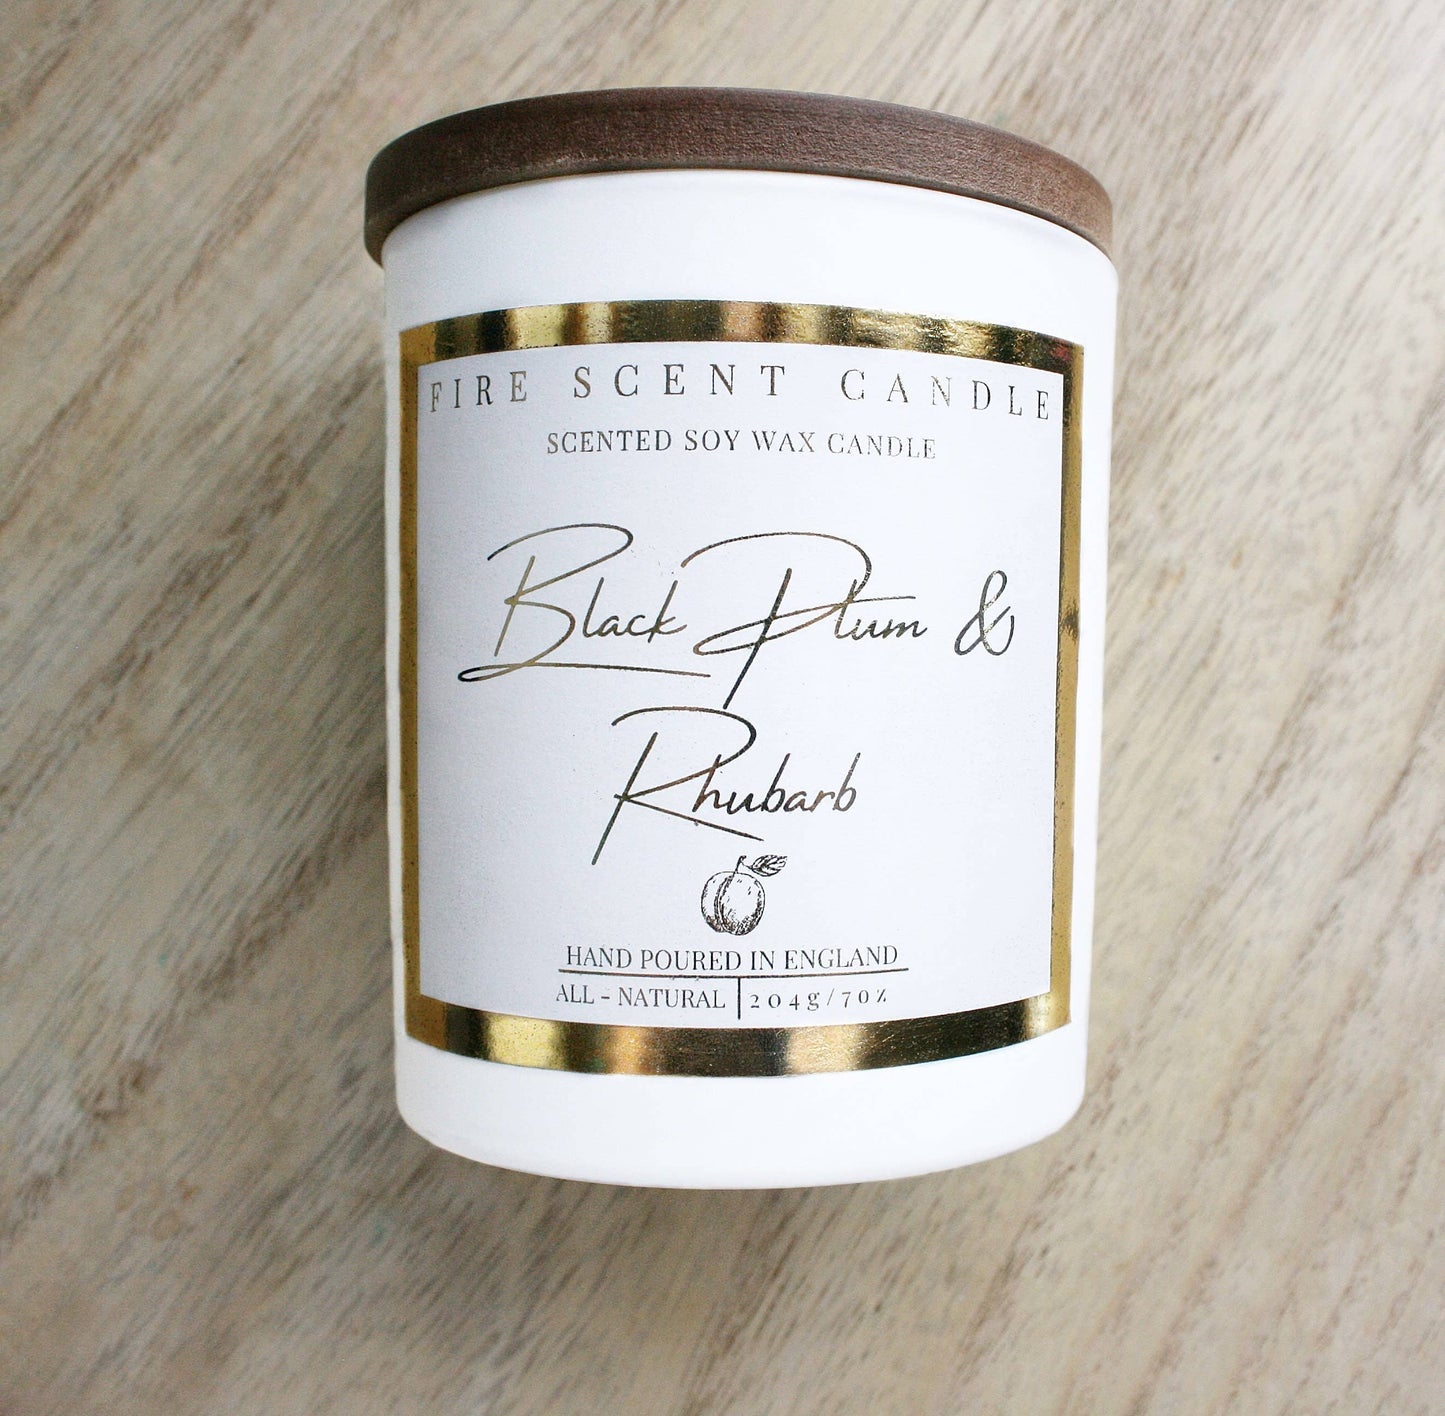 Black plum & rhubarb luxury scented soy wax candle